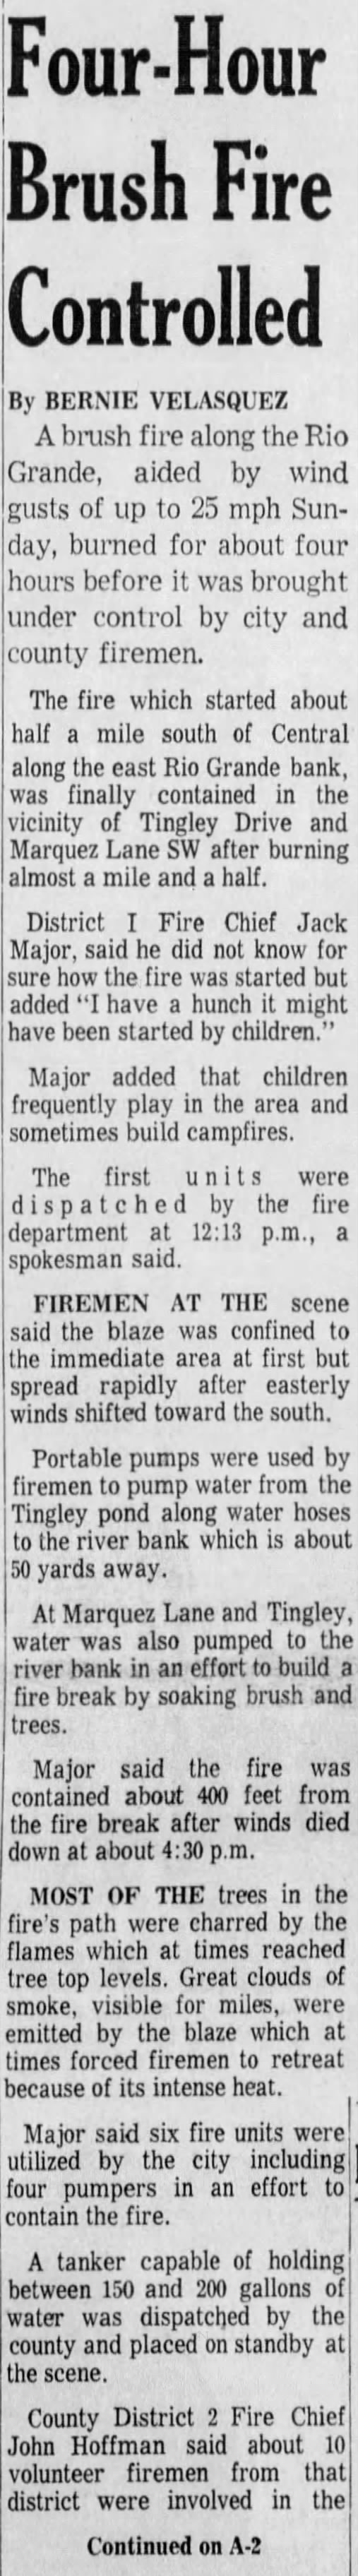 20 Mar 1972 - Four-Hour Brush Fire Controlled - pg. 1